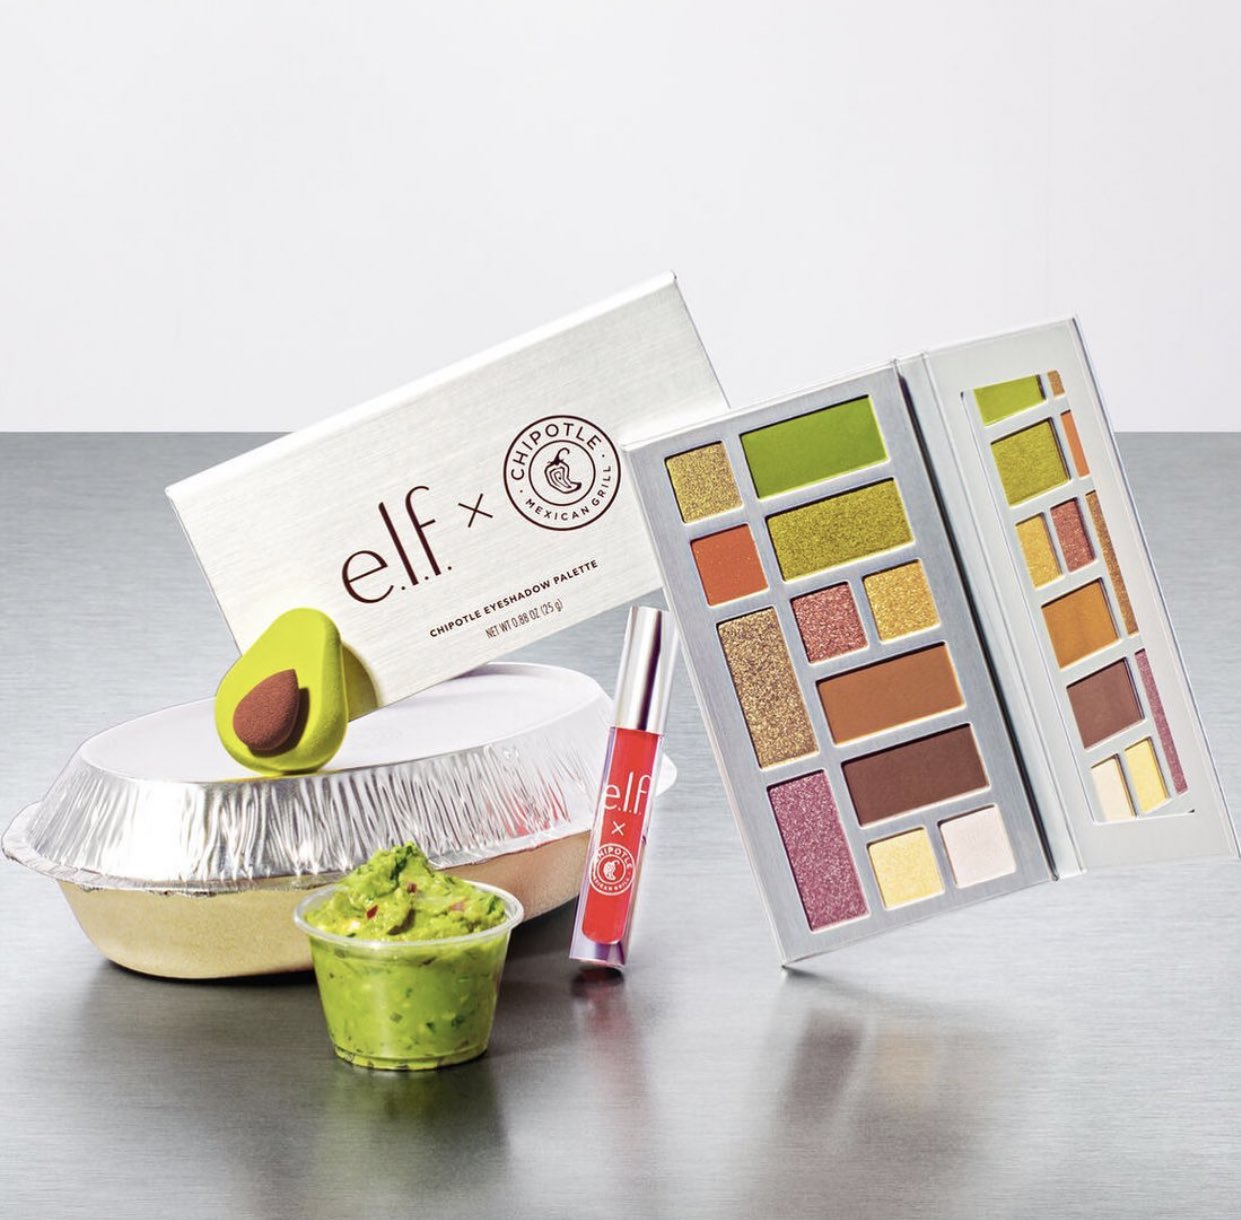 Elfcosmetics X chipotle New Collection2 - Elfcosmetics X chipotle New Collection